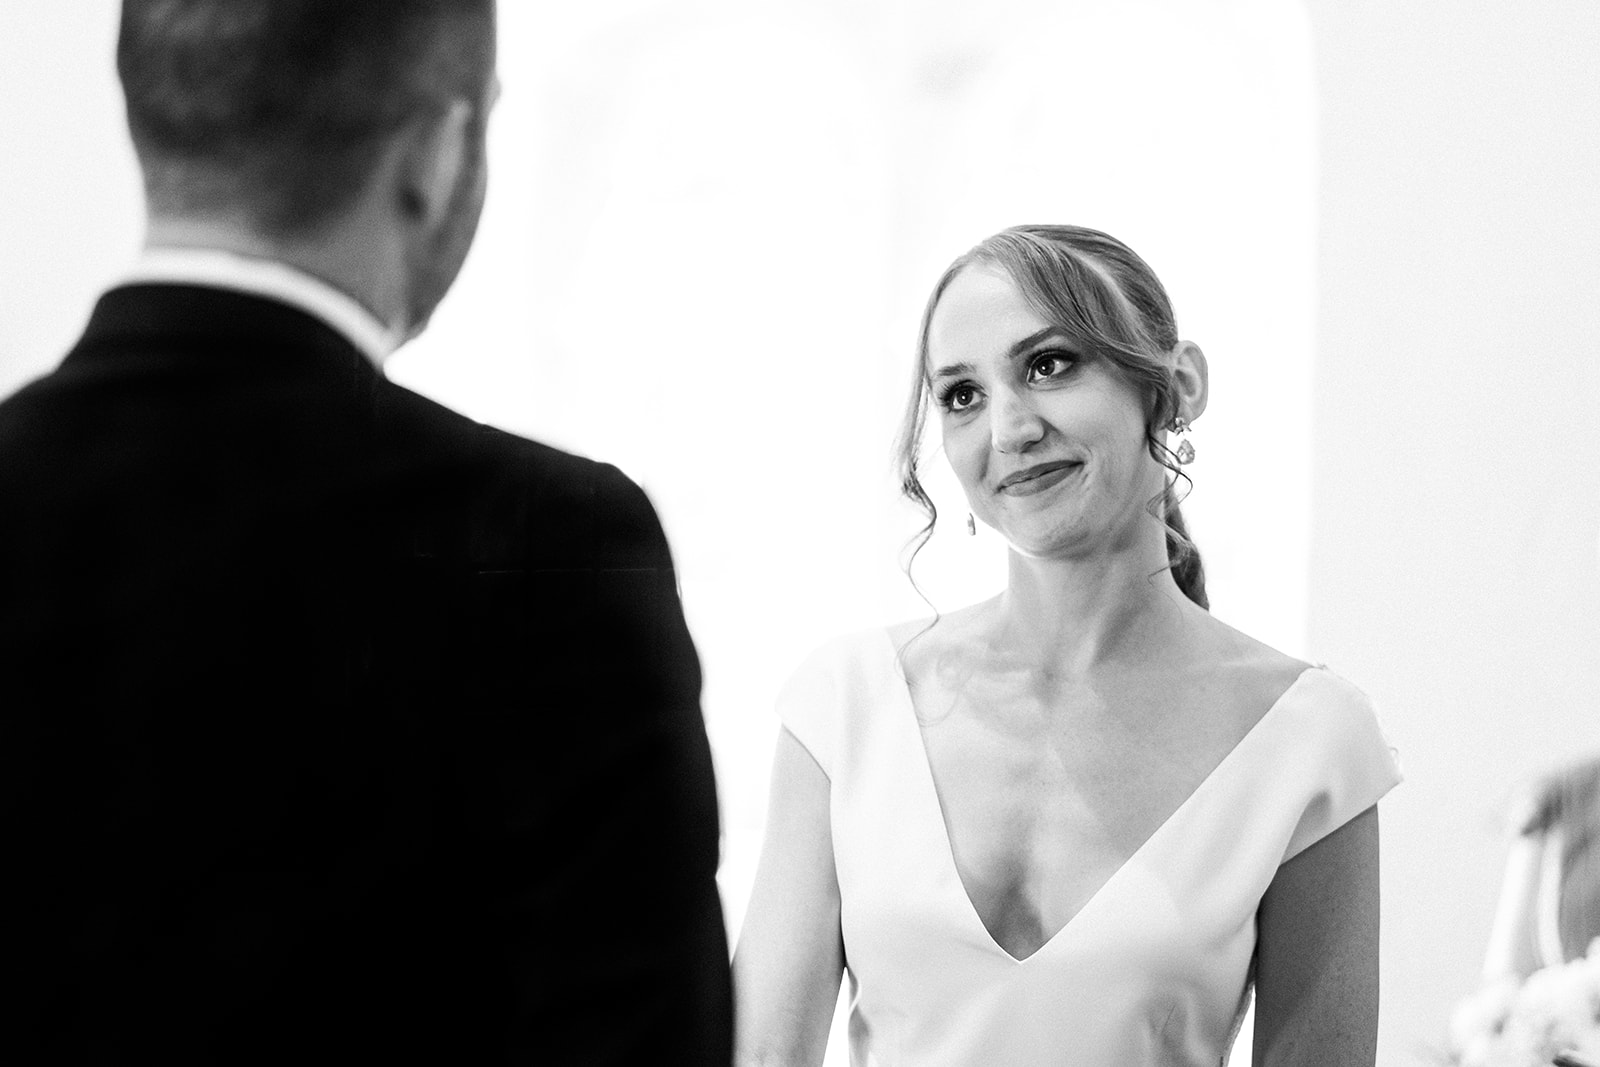 The bride looking at the groom during the ceremony. a black and white photograph